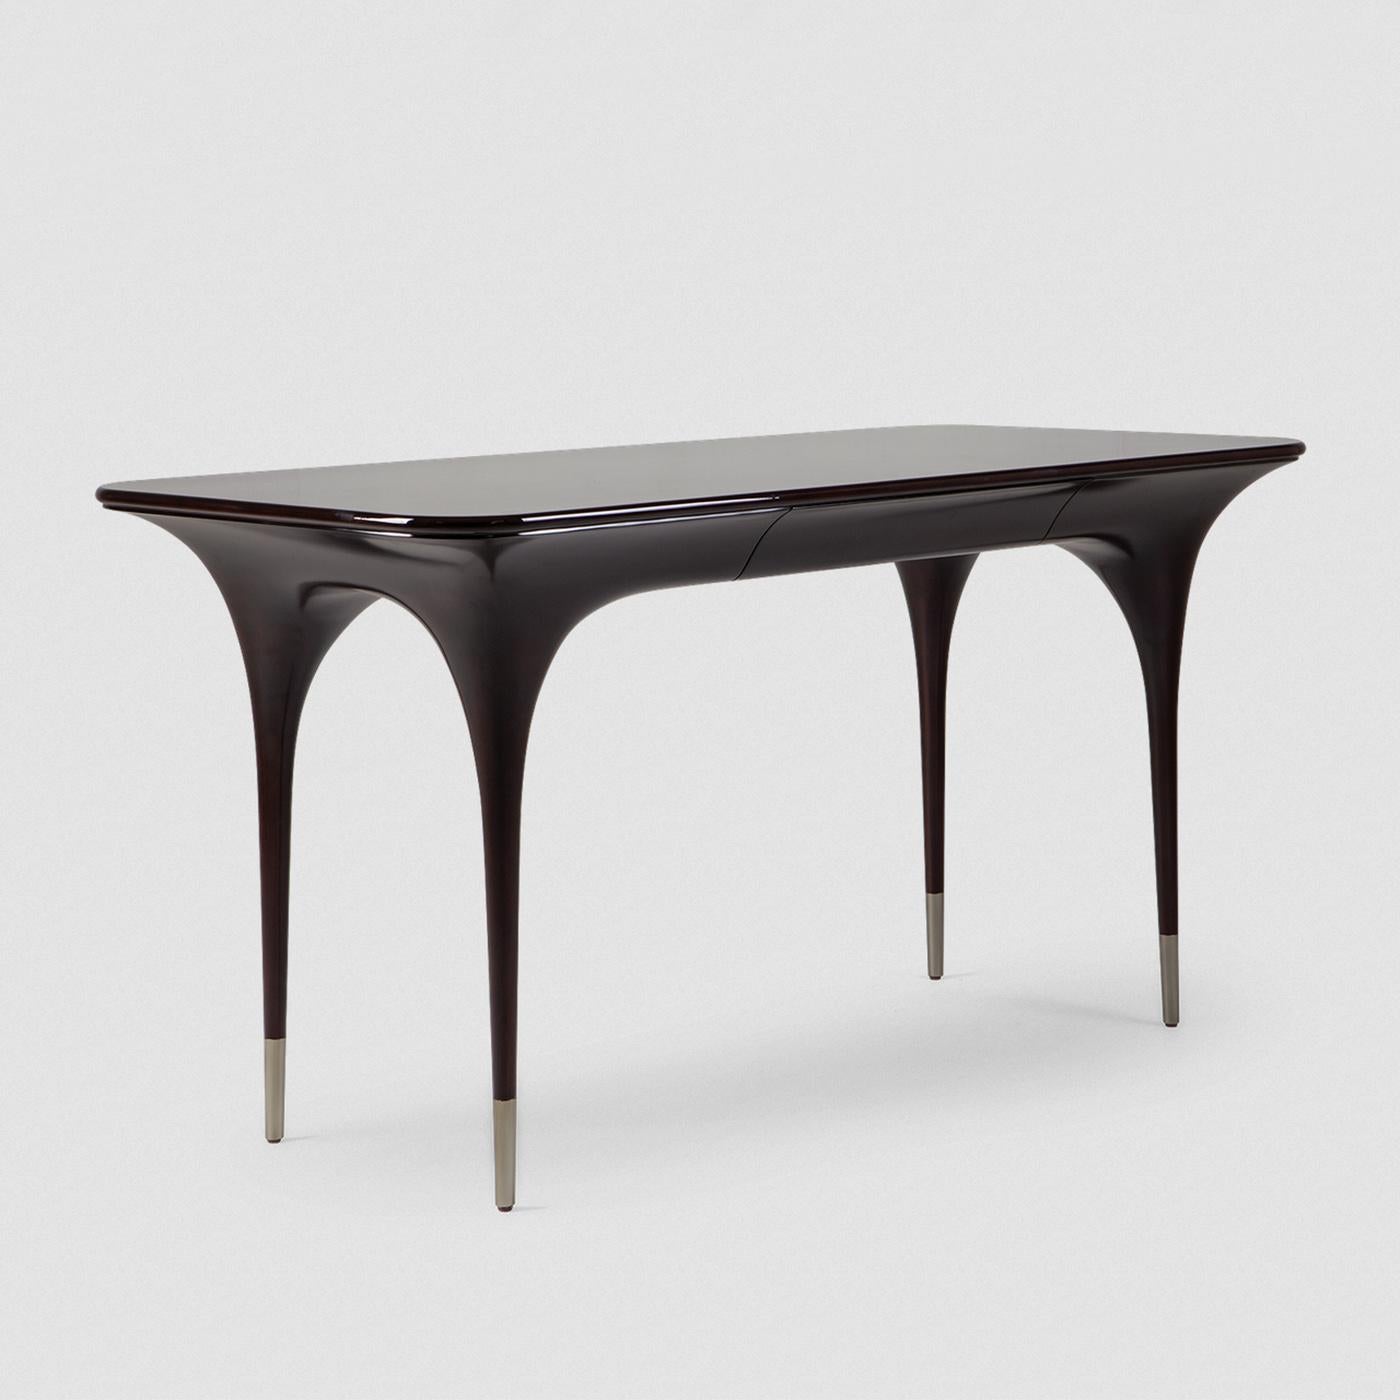 Desk Matis with structure in solid mahogany wood
in black lacquered finish. With brushed nickel finish feet on 
each leg and with 1 drawer covered with suede leather.